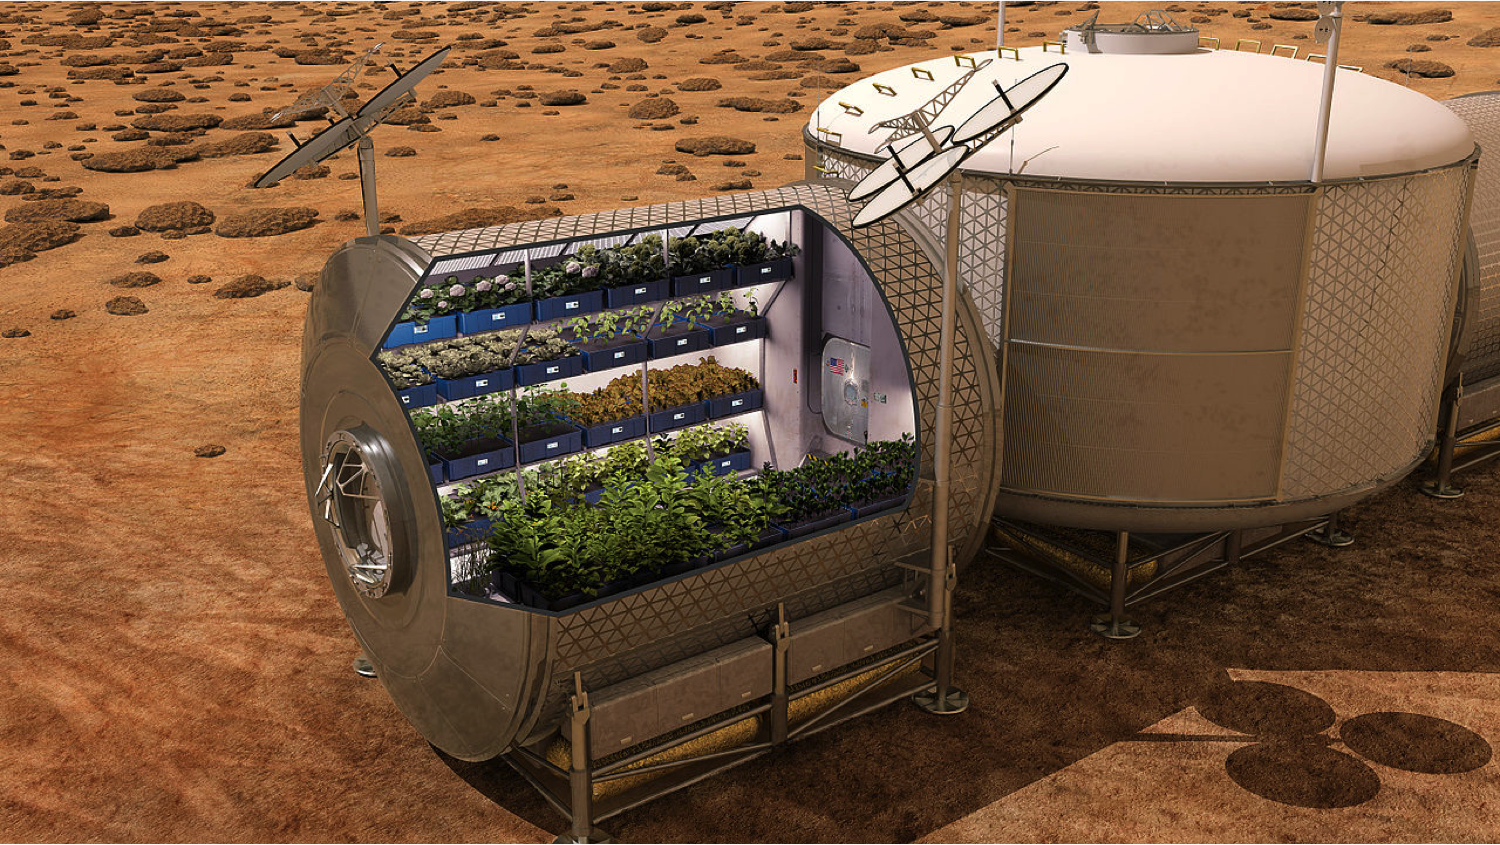 Scientists have proposed a new method to grow plants on Mars. Credit: NASA